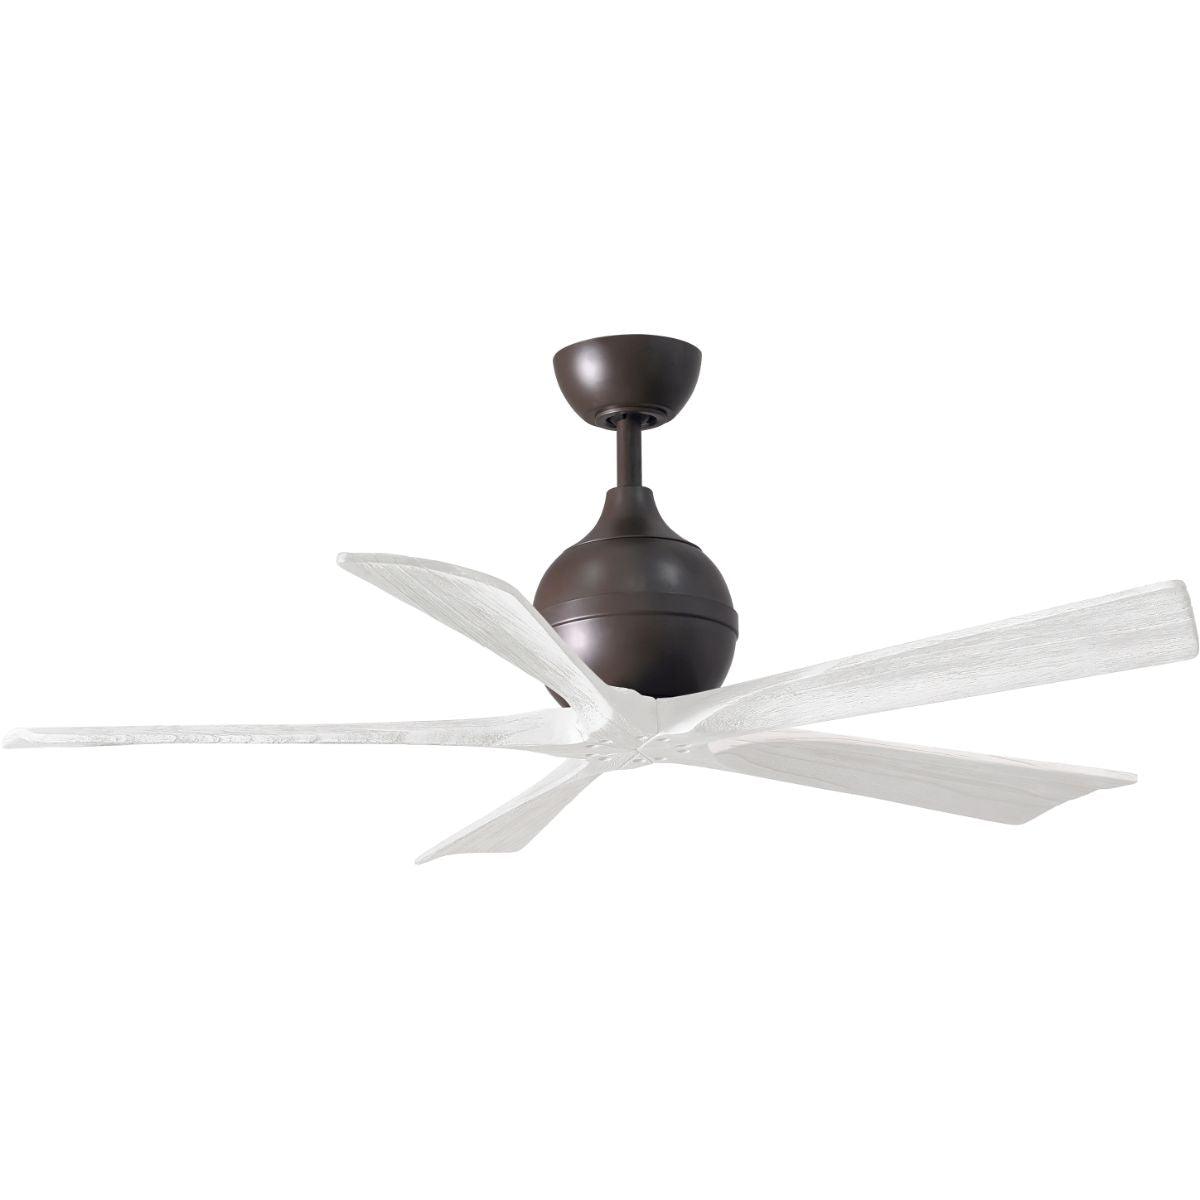 Irene 52 Inch 5 Blades Modern Outdoor Ceiling Fan With Remote And Wall Control